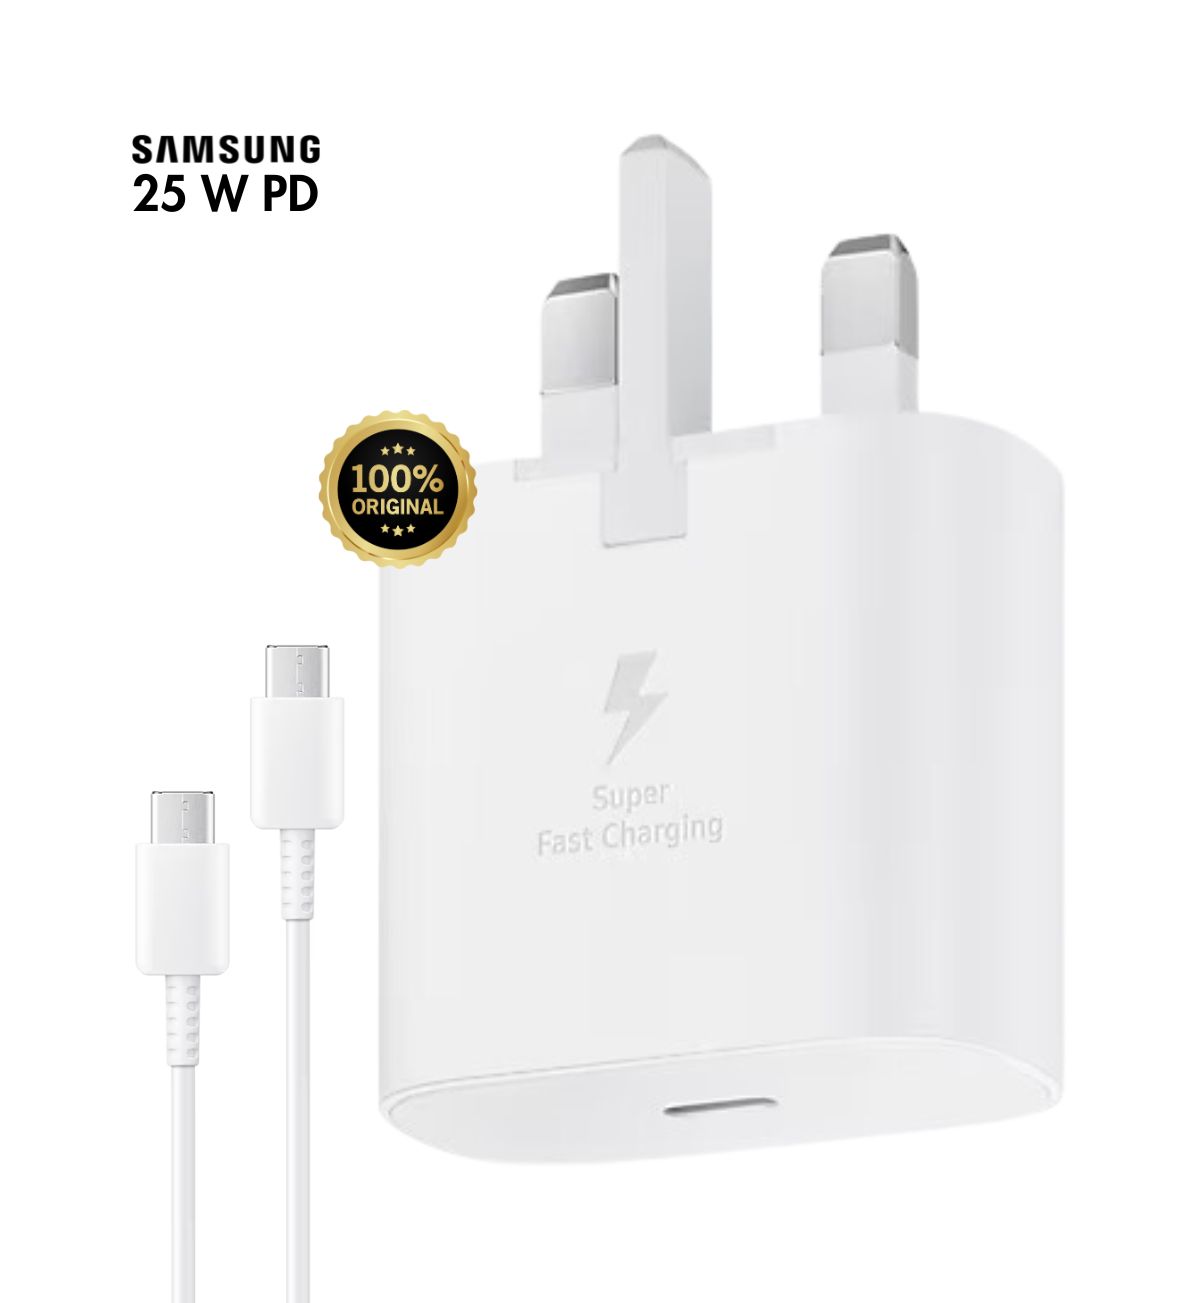 Original Samsung 25W Super Fast Charger (White): Power Up Your Galaxy Device in Minutes